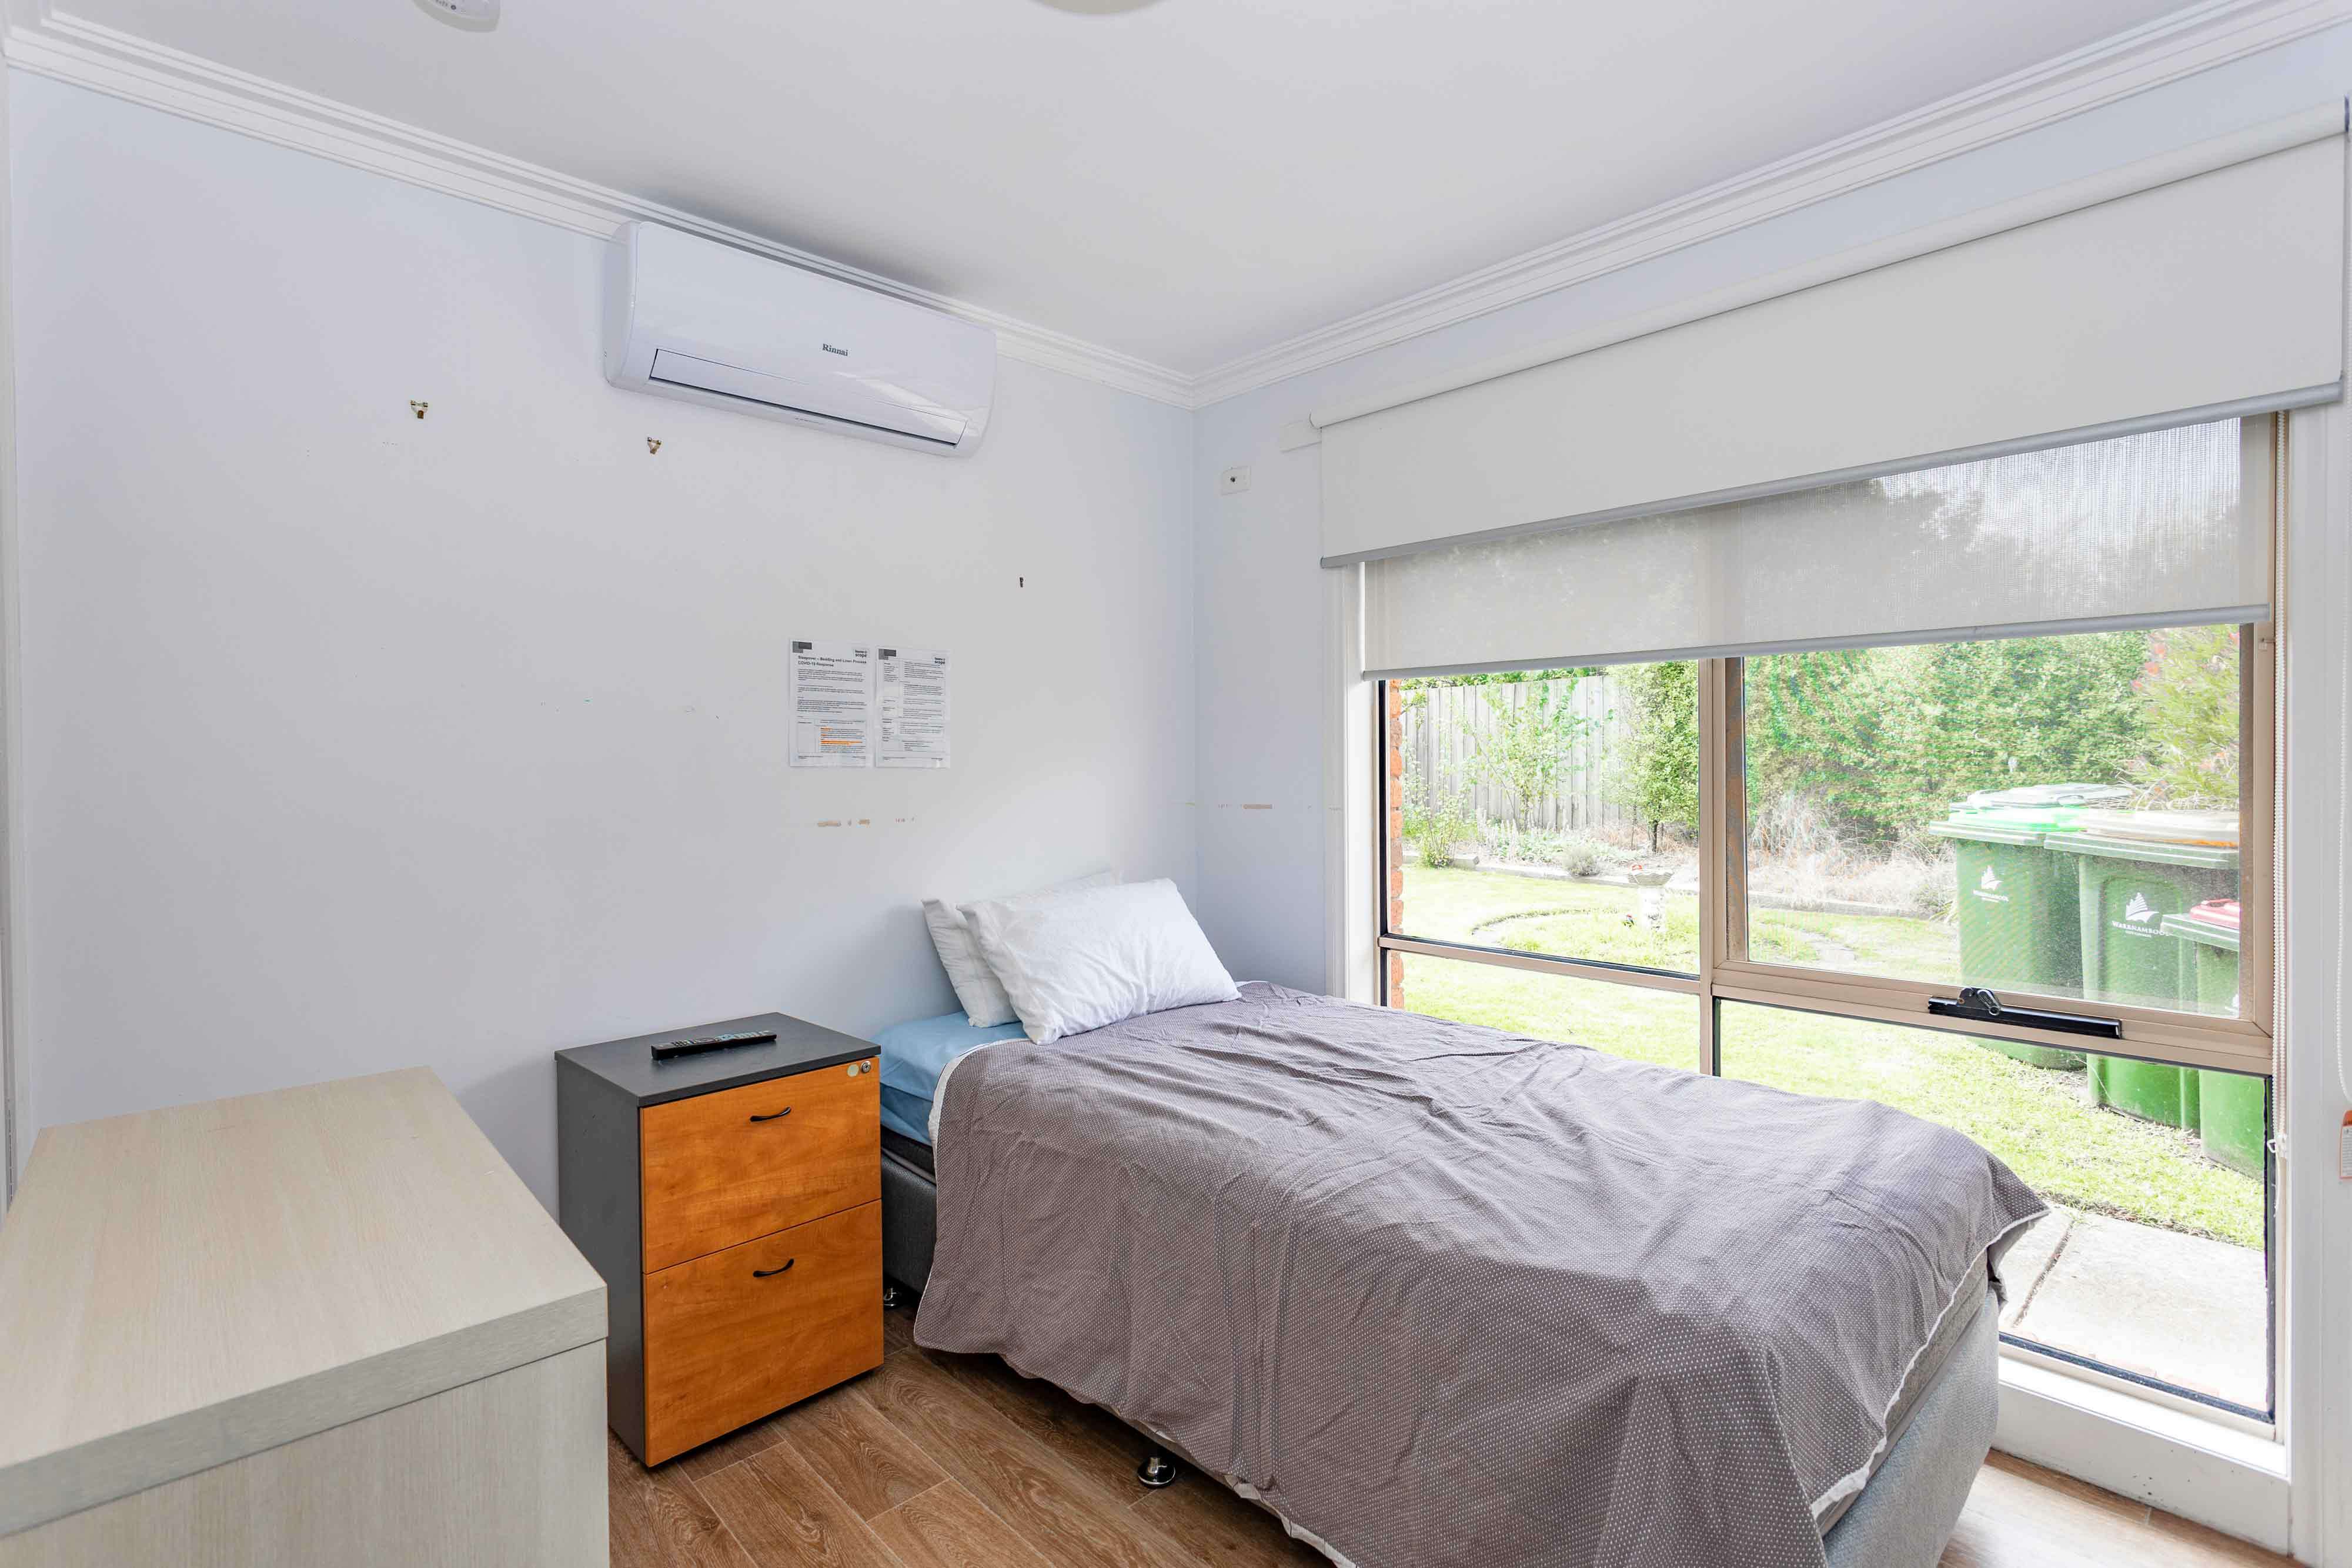 Bedroom with orange bedside table and air conditioning